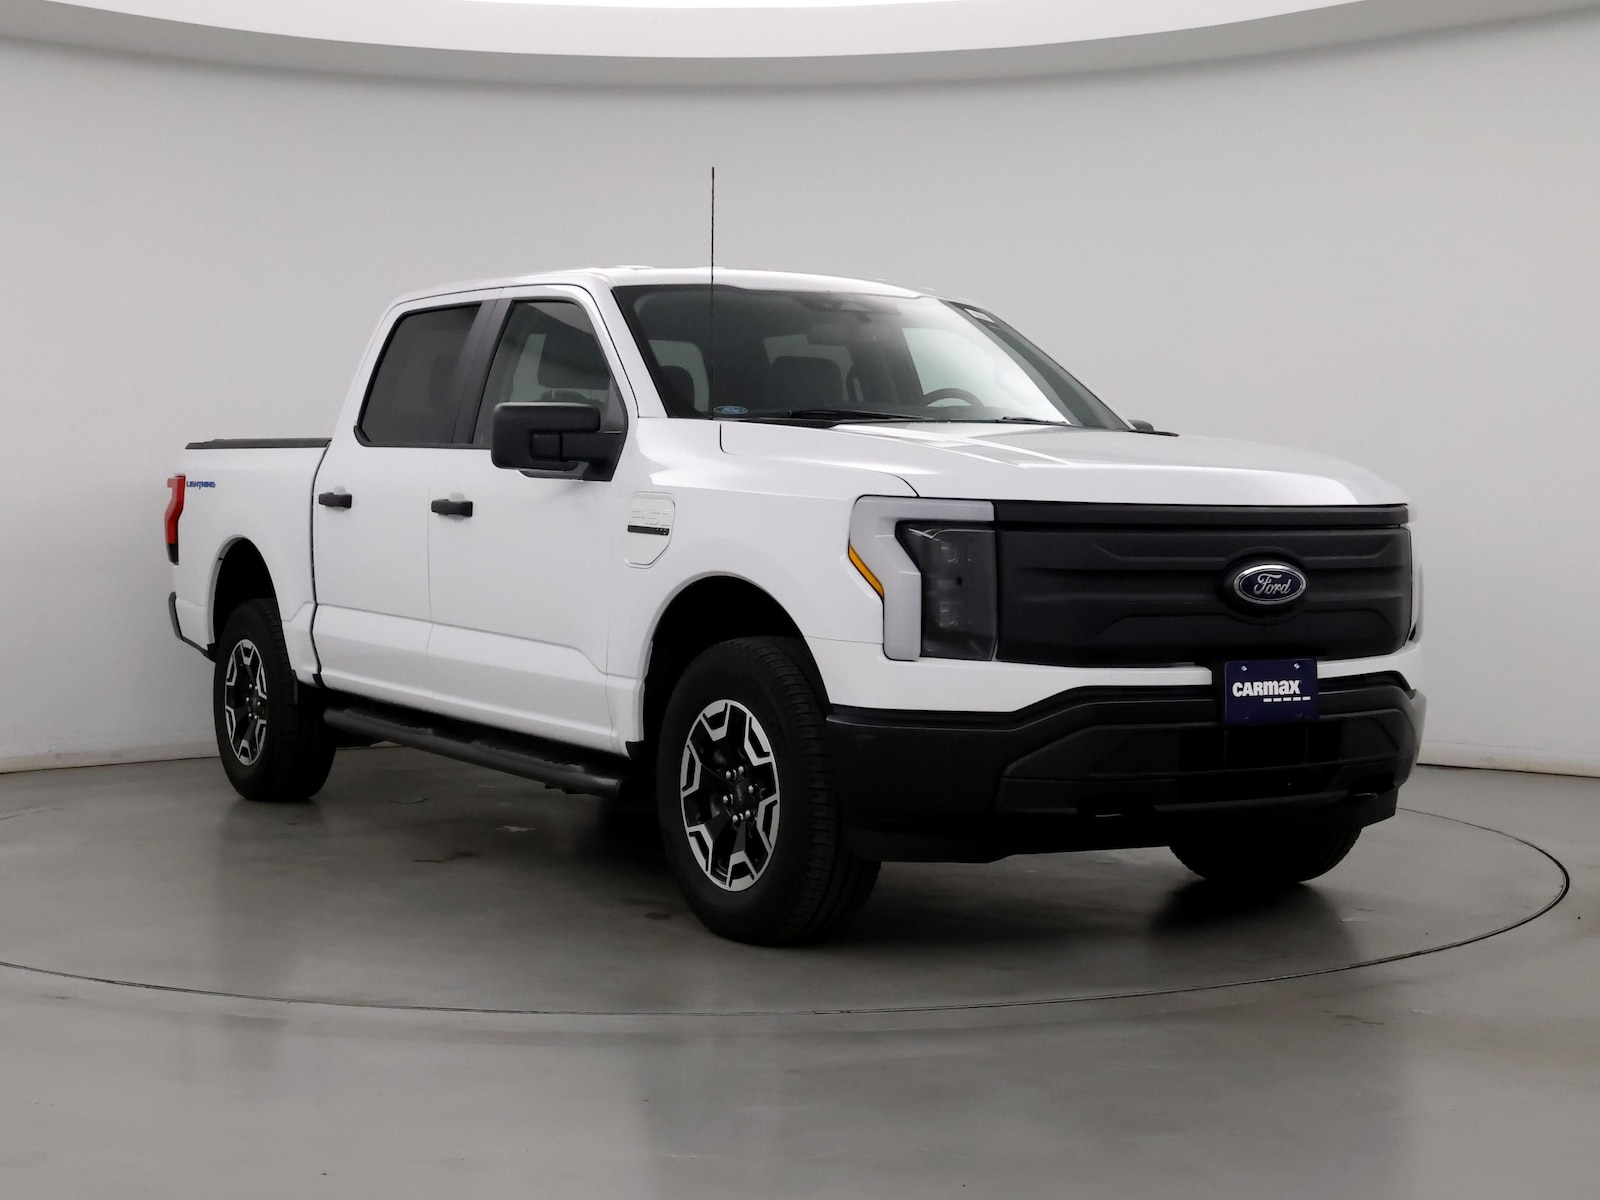 Used 2022 Ford F-150 Lightning Pro with VIN 1FTVW1EL6NWG02094 for sale in Kenosha, WI